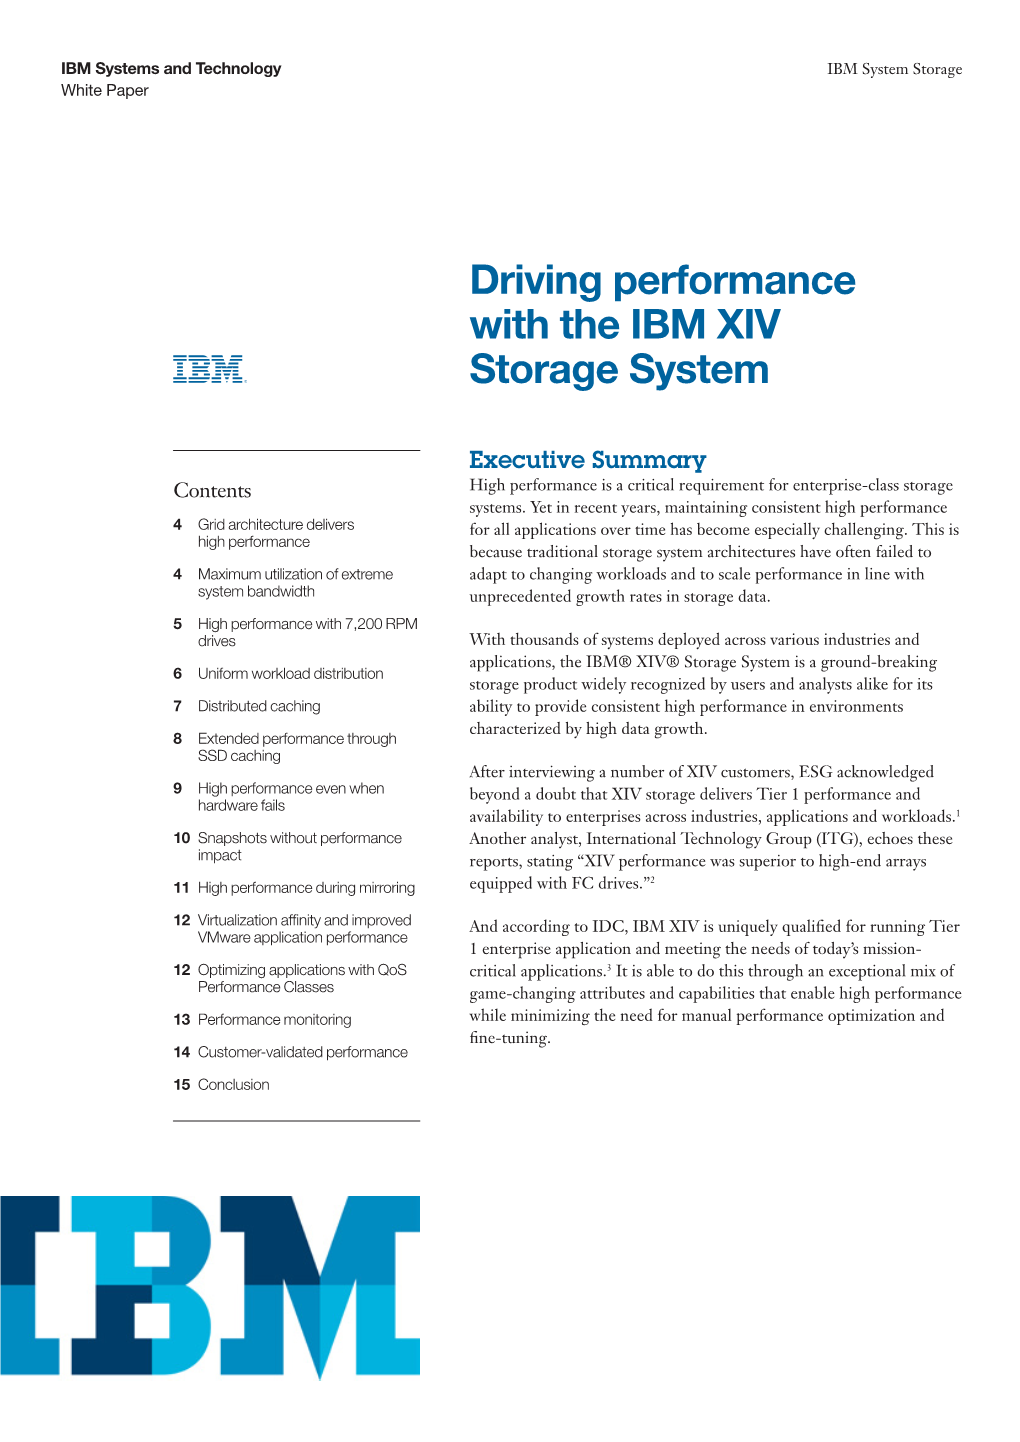 Driving Performance with the IBM XIV Storage System